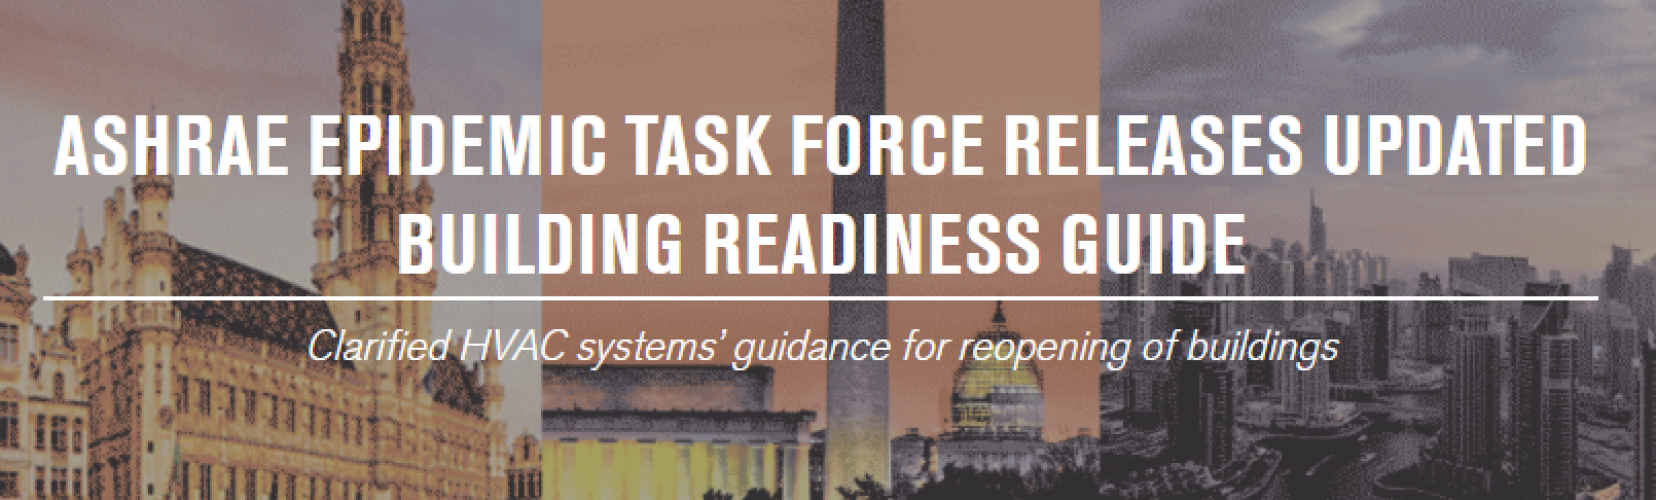 ASHRAE Epidemic Task Force Releases Updated Building Readiness Guide